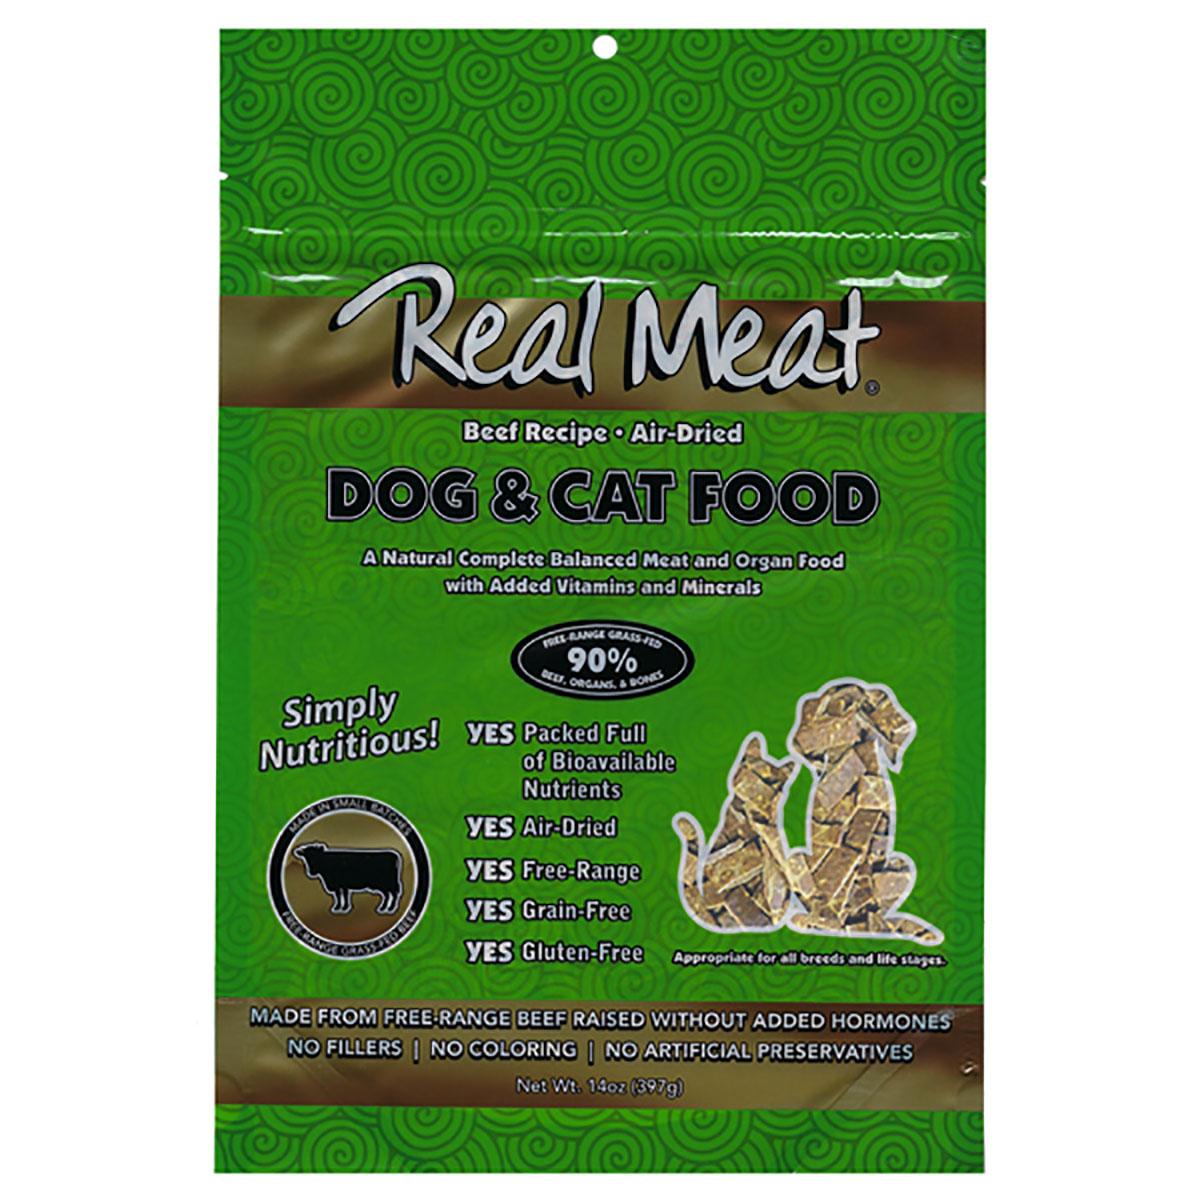 Real Meat Dog and Cat Food - Beef